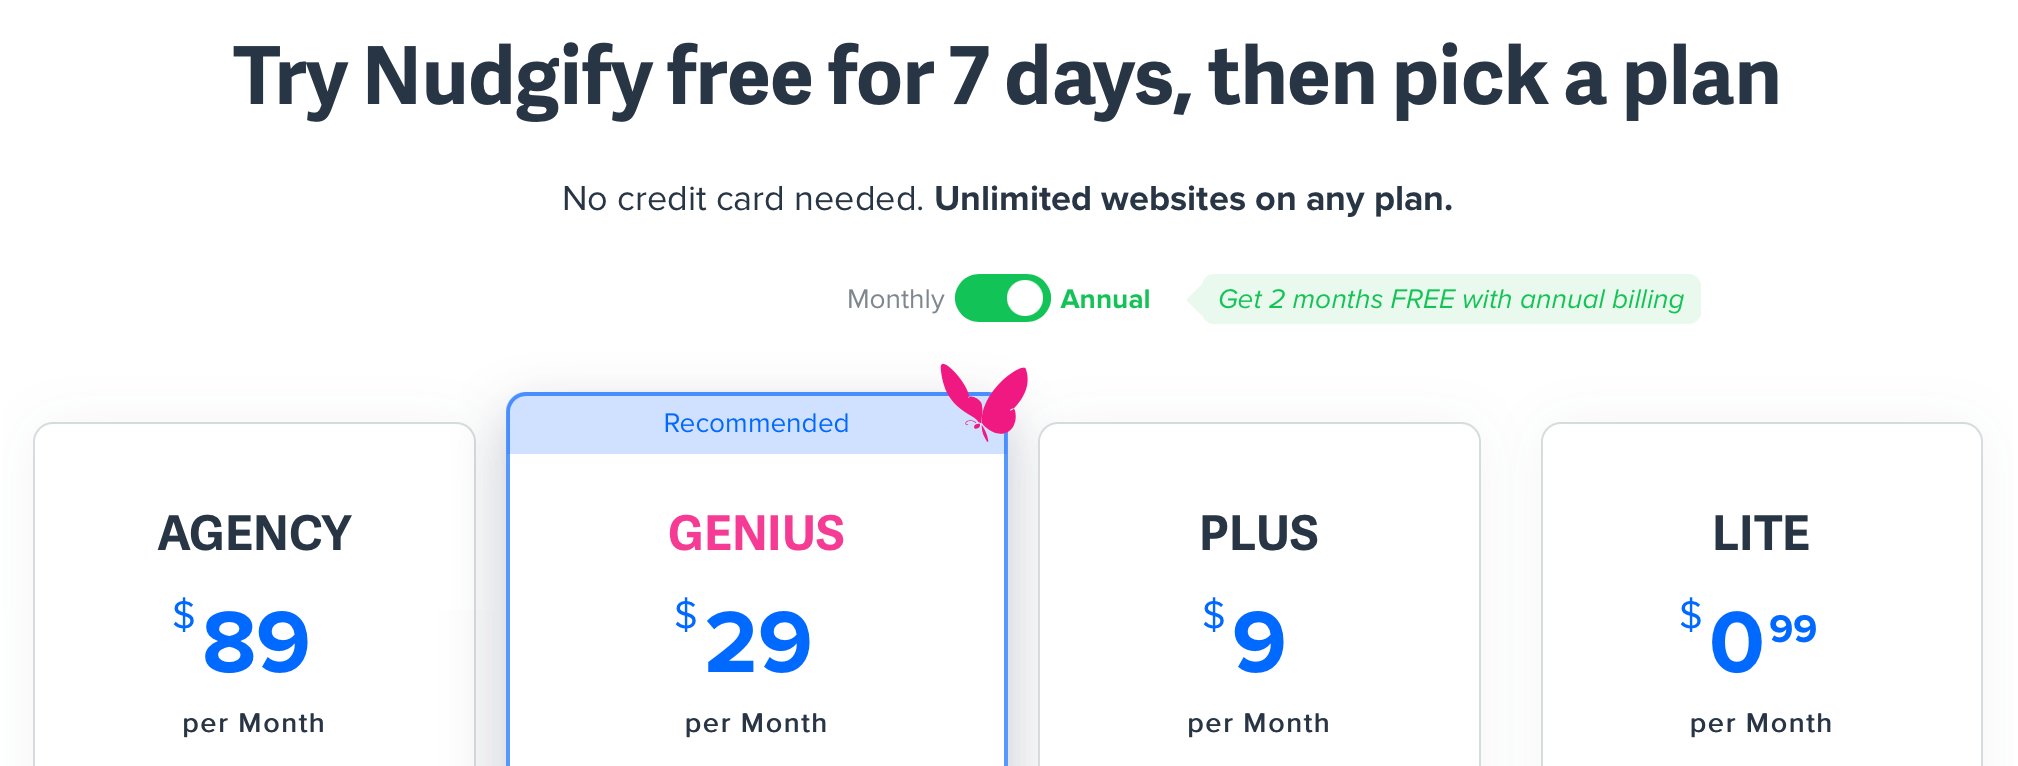 nudgify free trial and plans